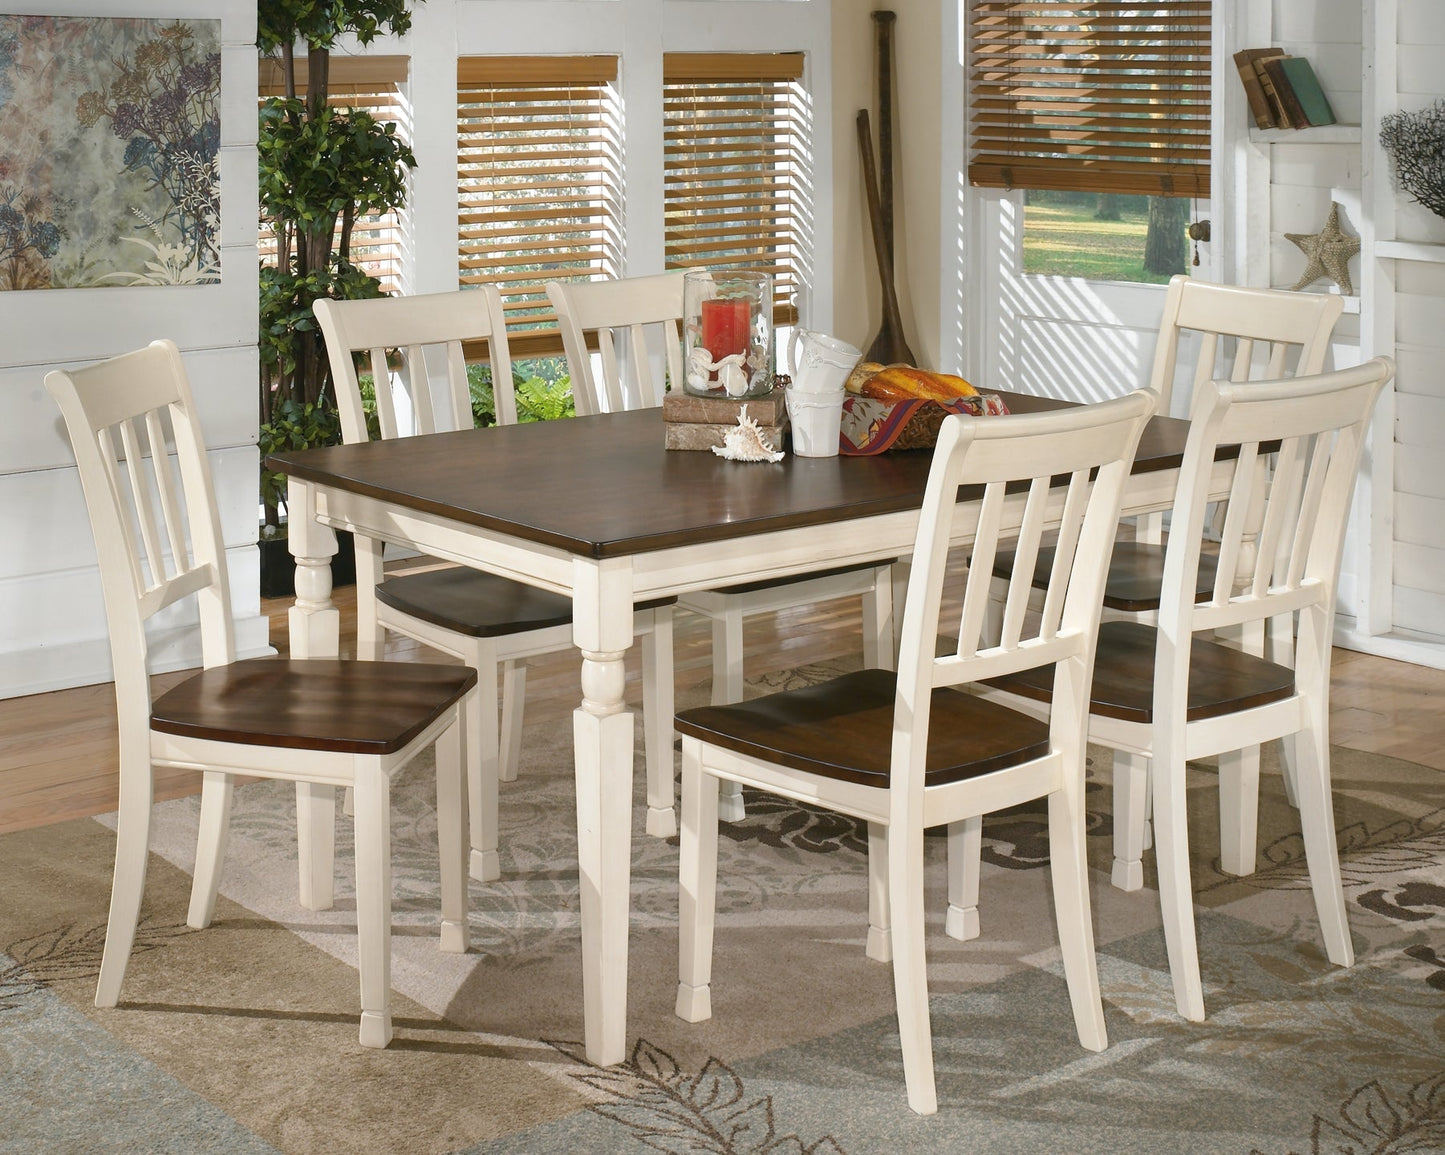 Whitesburg Dining Table and 6 Chairs Rent Wise Rent To Own Jacksonville, Florida